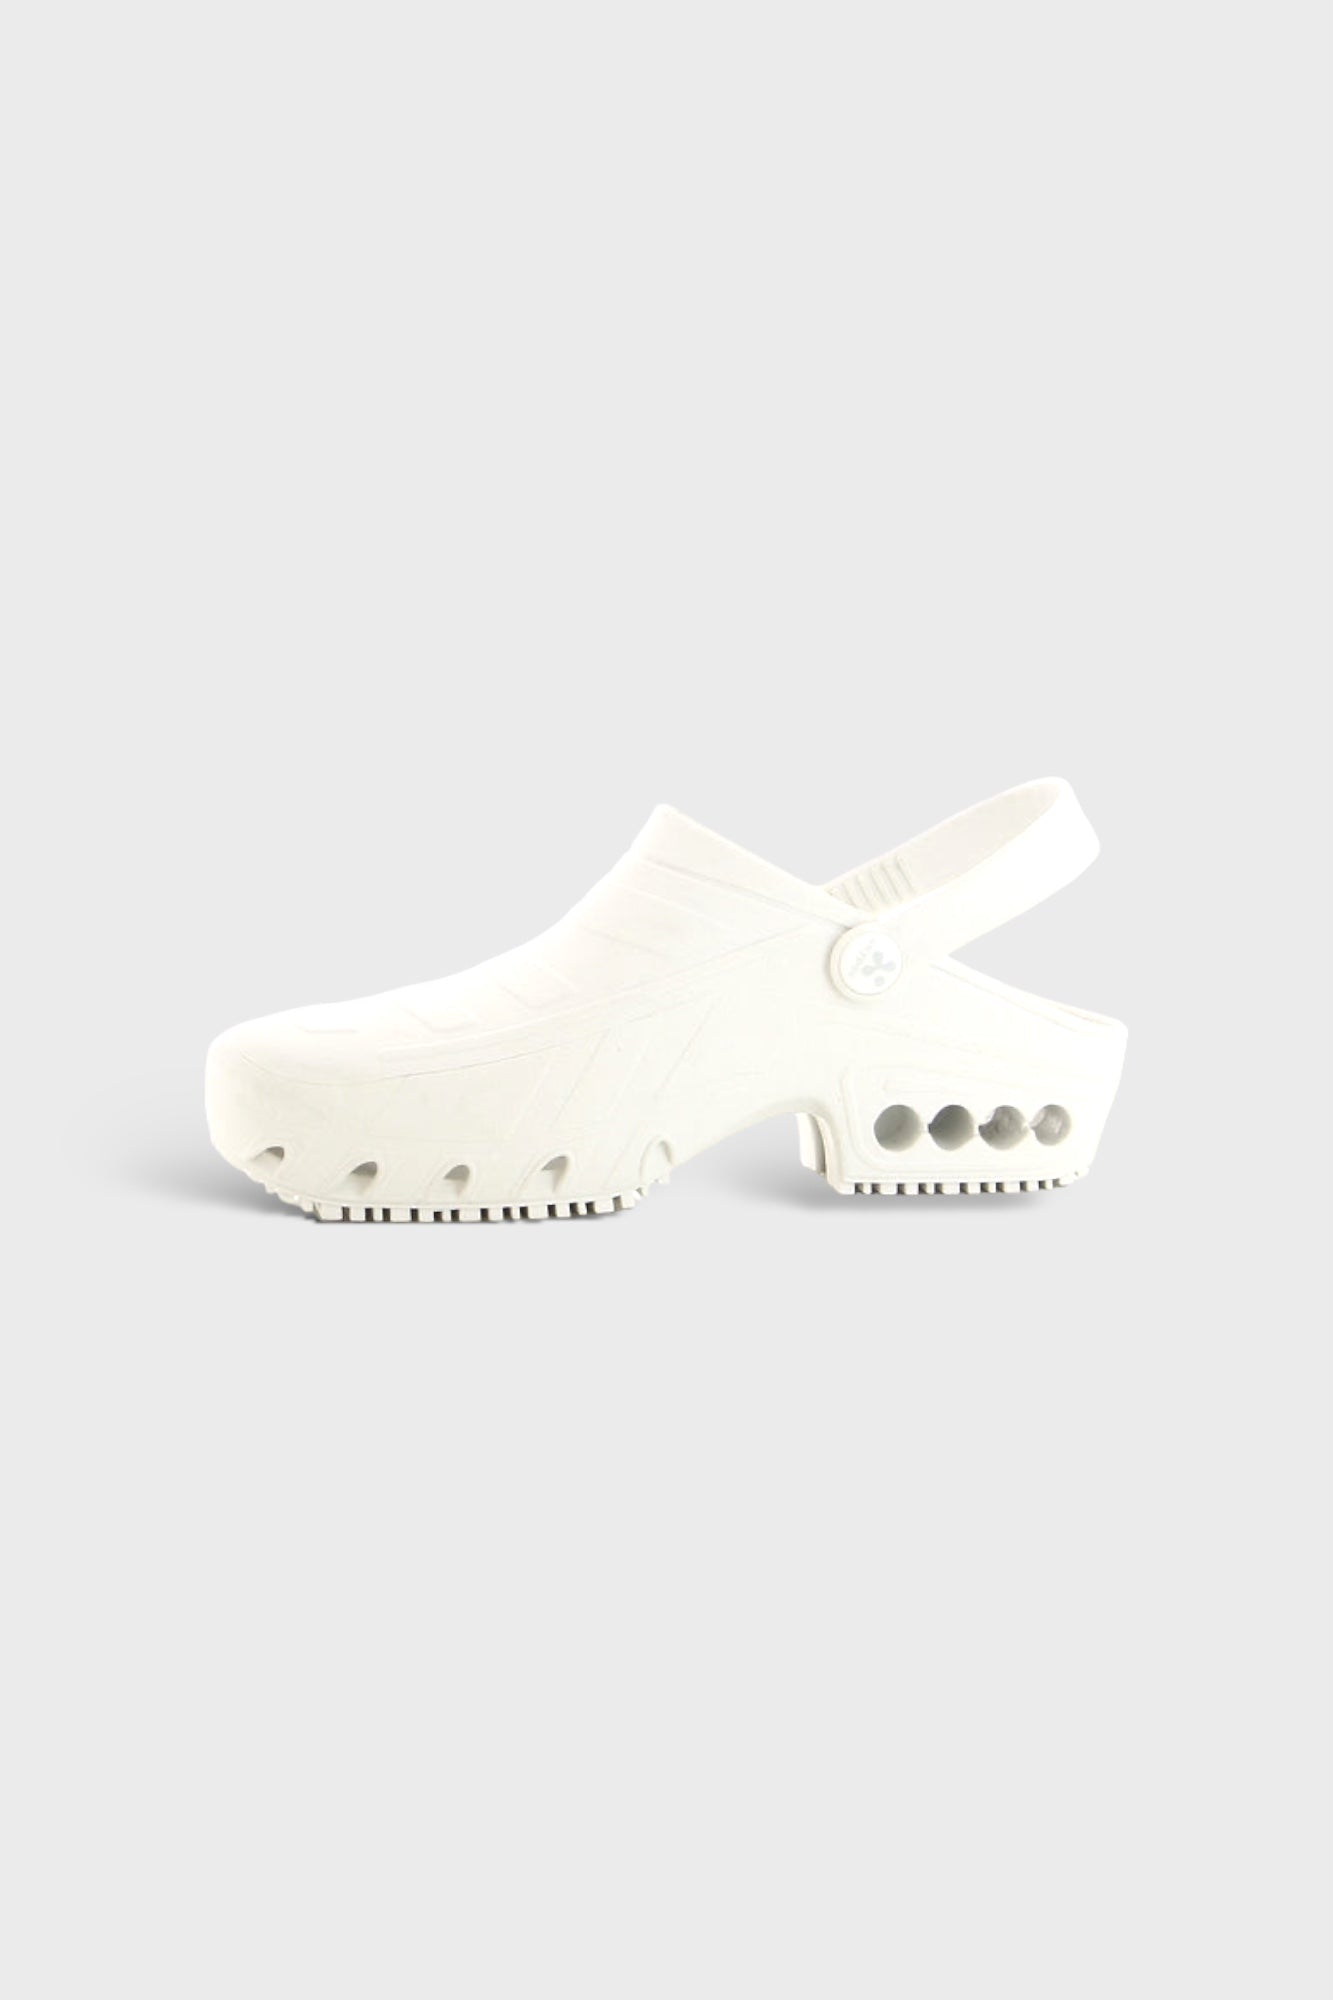 OXYCLOG - AUTOCLAVABLE OPERATING ROOM CLOGS WITH NON-SLIP OUTSOLE